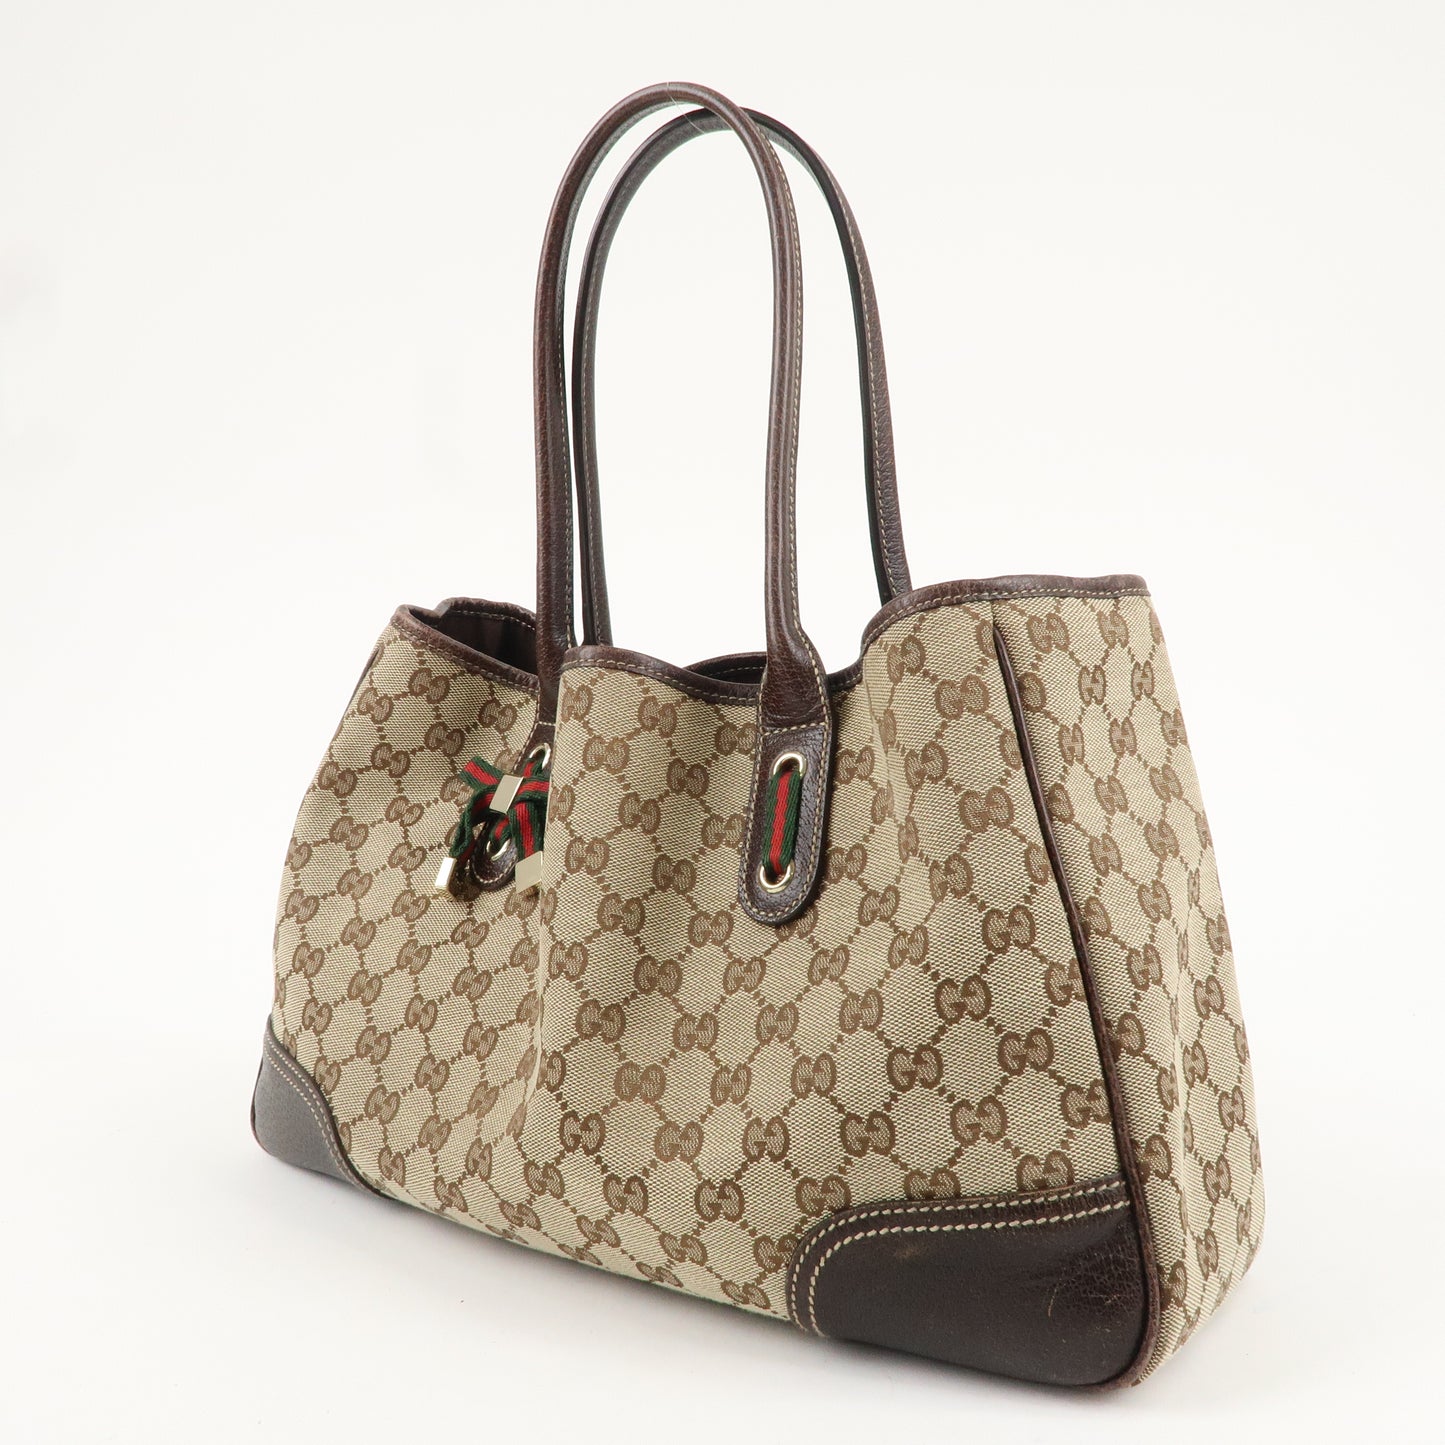 GUCCI Princy Sherry GG Canvas Leather Tote Bag Beige 163805